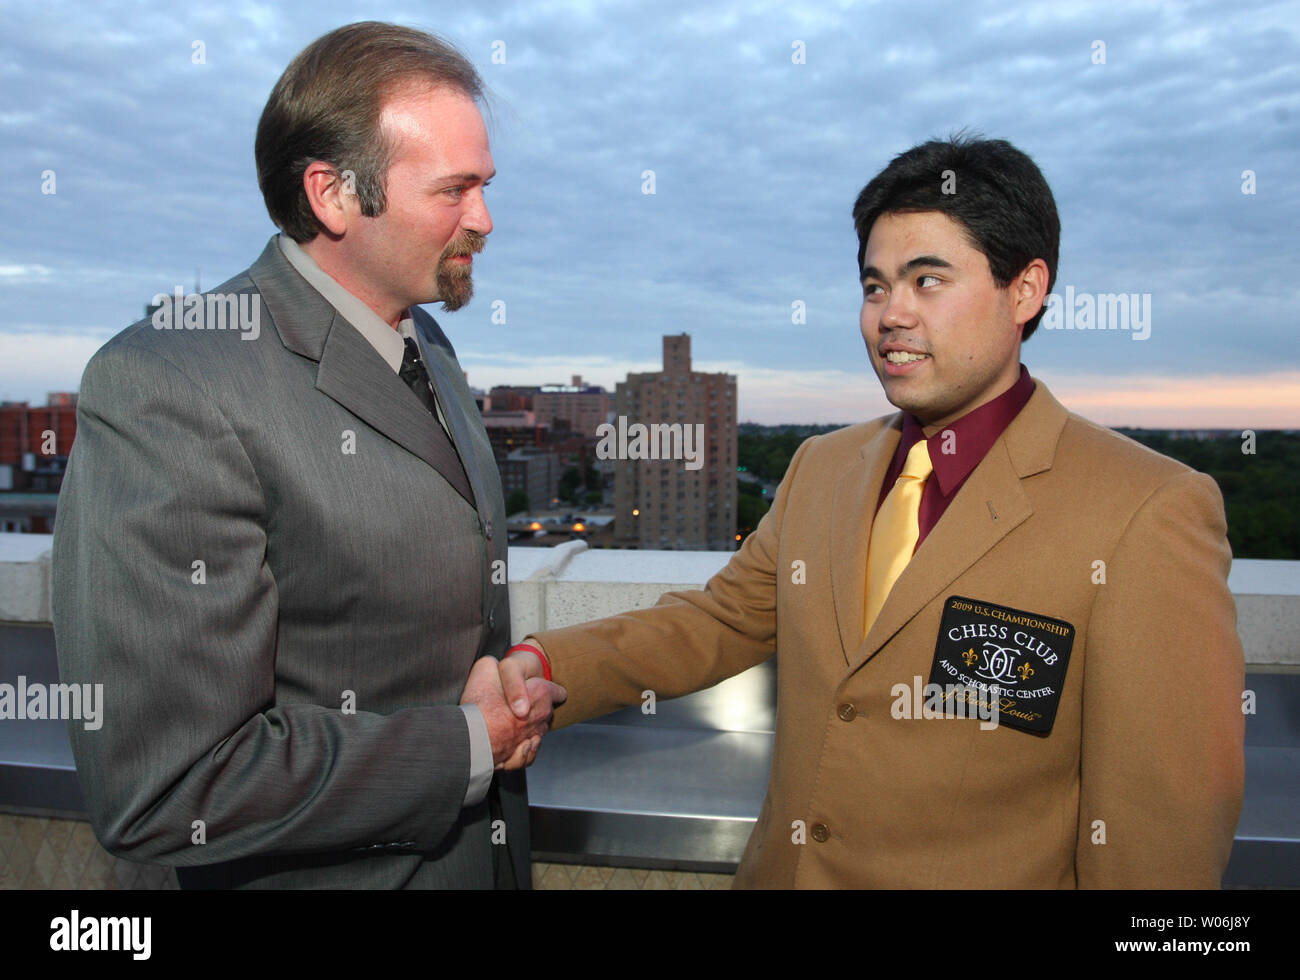 Hikaru Nakamura of White Plains, New York (R) is congratulated by Bill Hall, executive director of the U.S. Chess Federation after winning the Brown Jacket and the U.S. Chess Championship in St. Louis on May 17, 2009. Nakamura beat out 25 others from across the United States to win the invitational tournament. (UPI Photo/Bill Greenblatt) Stock Photo